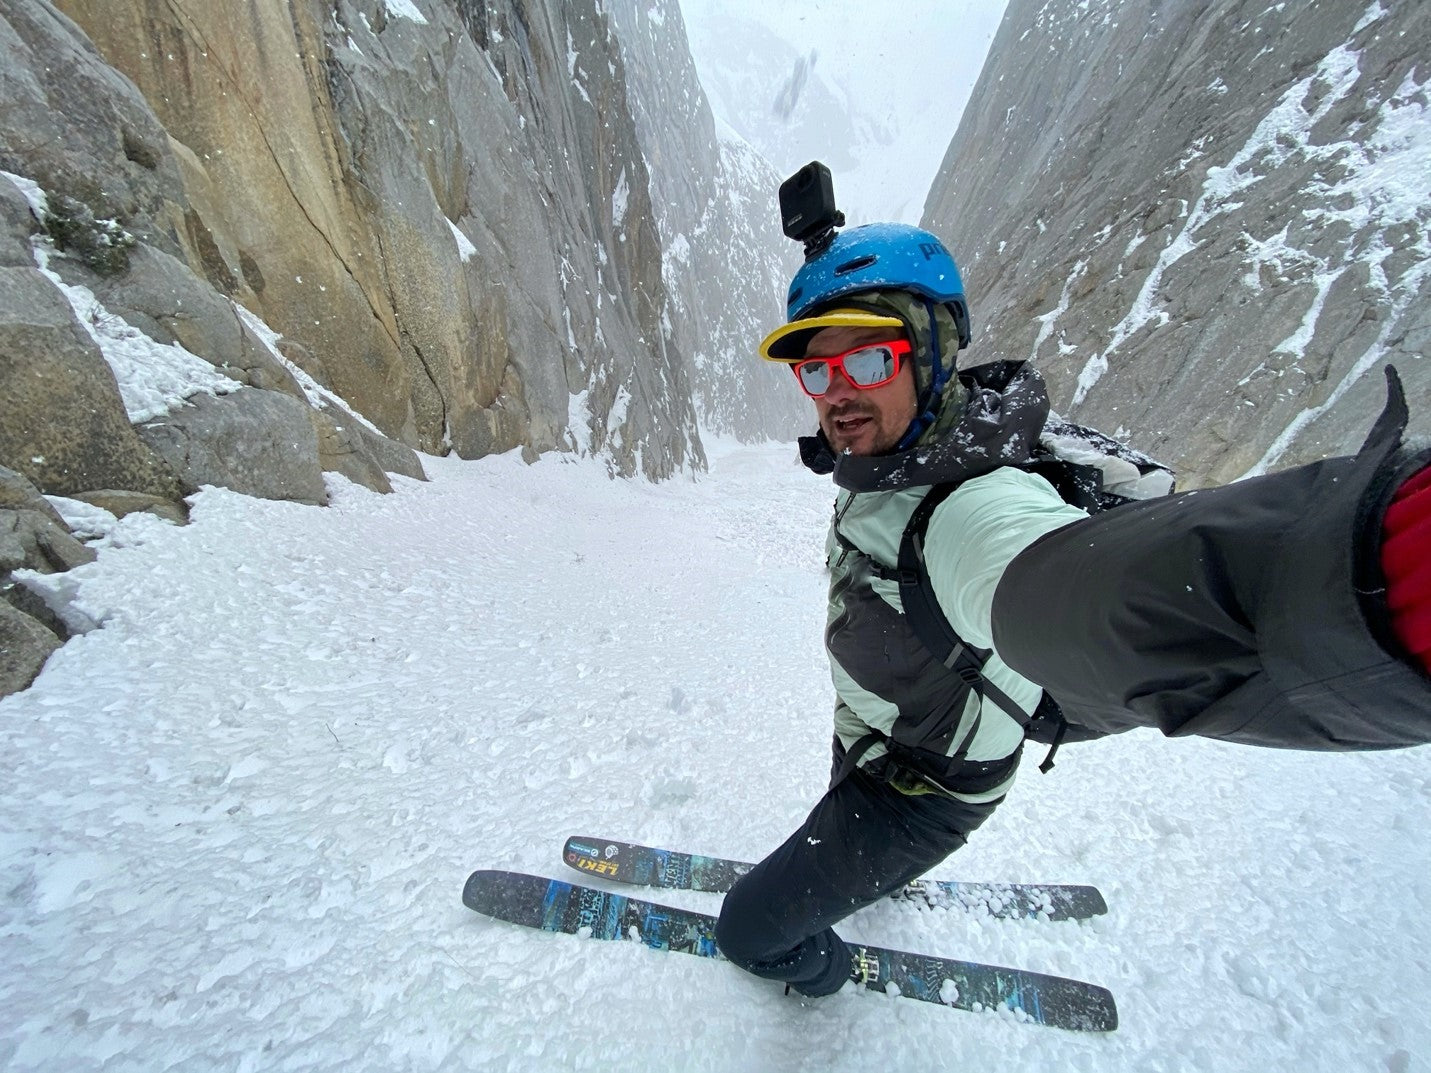 Skiing the first descent of a 6000 foot couloir in the Karakoram.